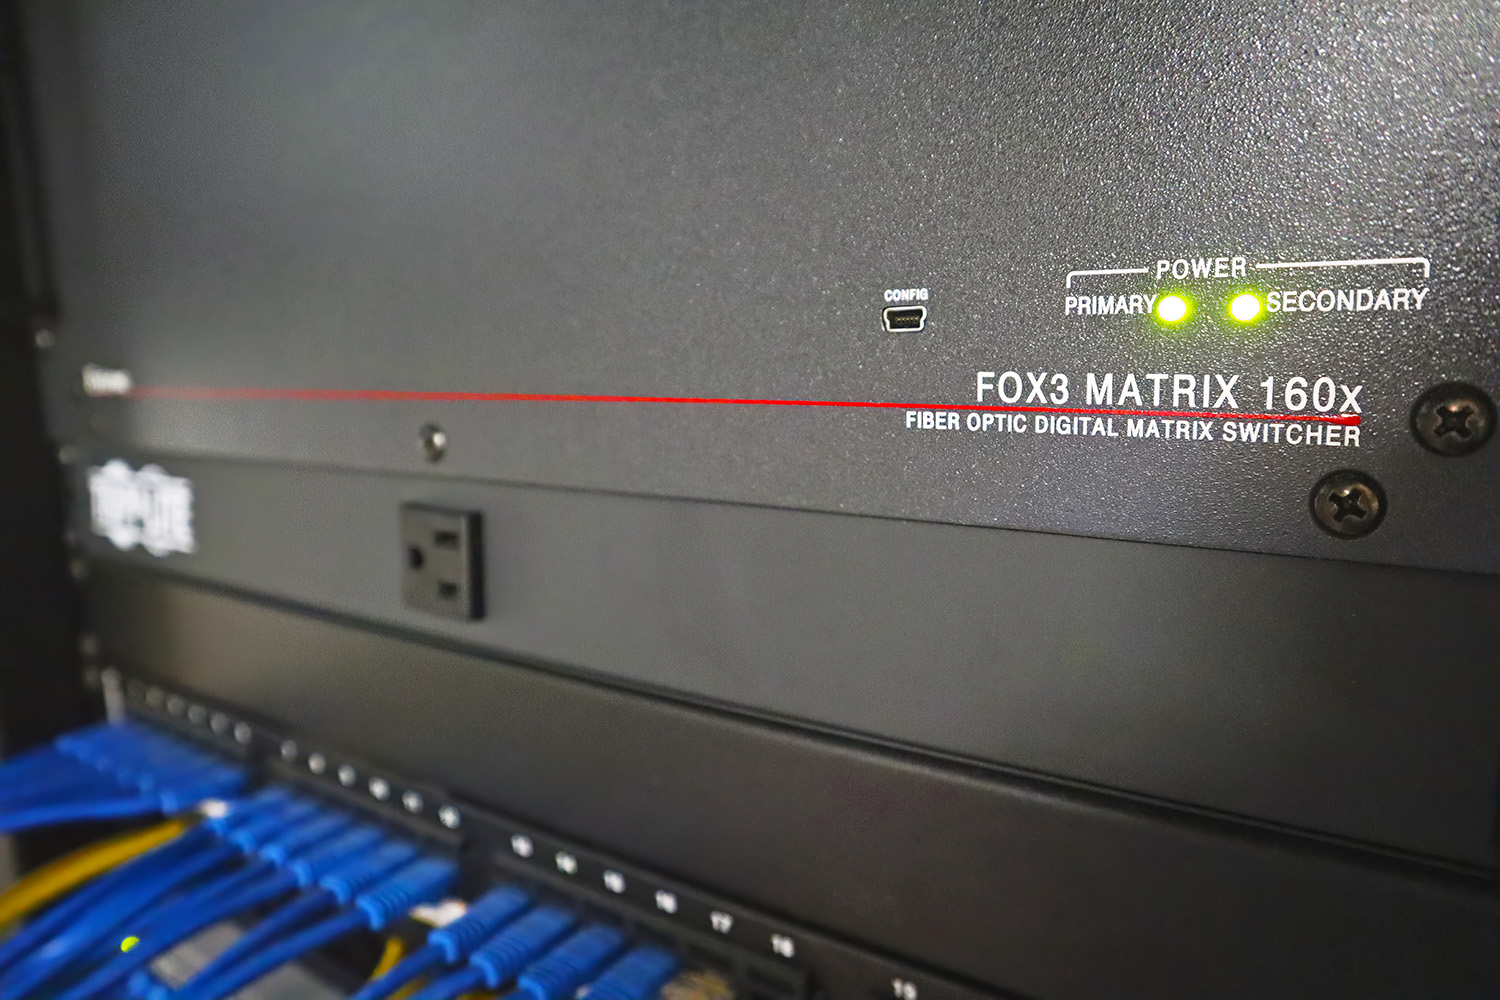 IIS selected the FOX3 matrix switcher model without a front panel controller to ensure only authorized individuals can access the EOC’s AV system.